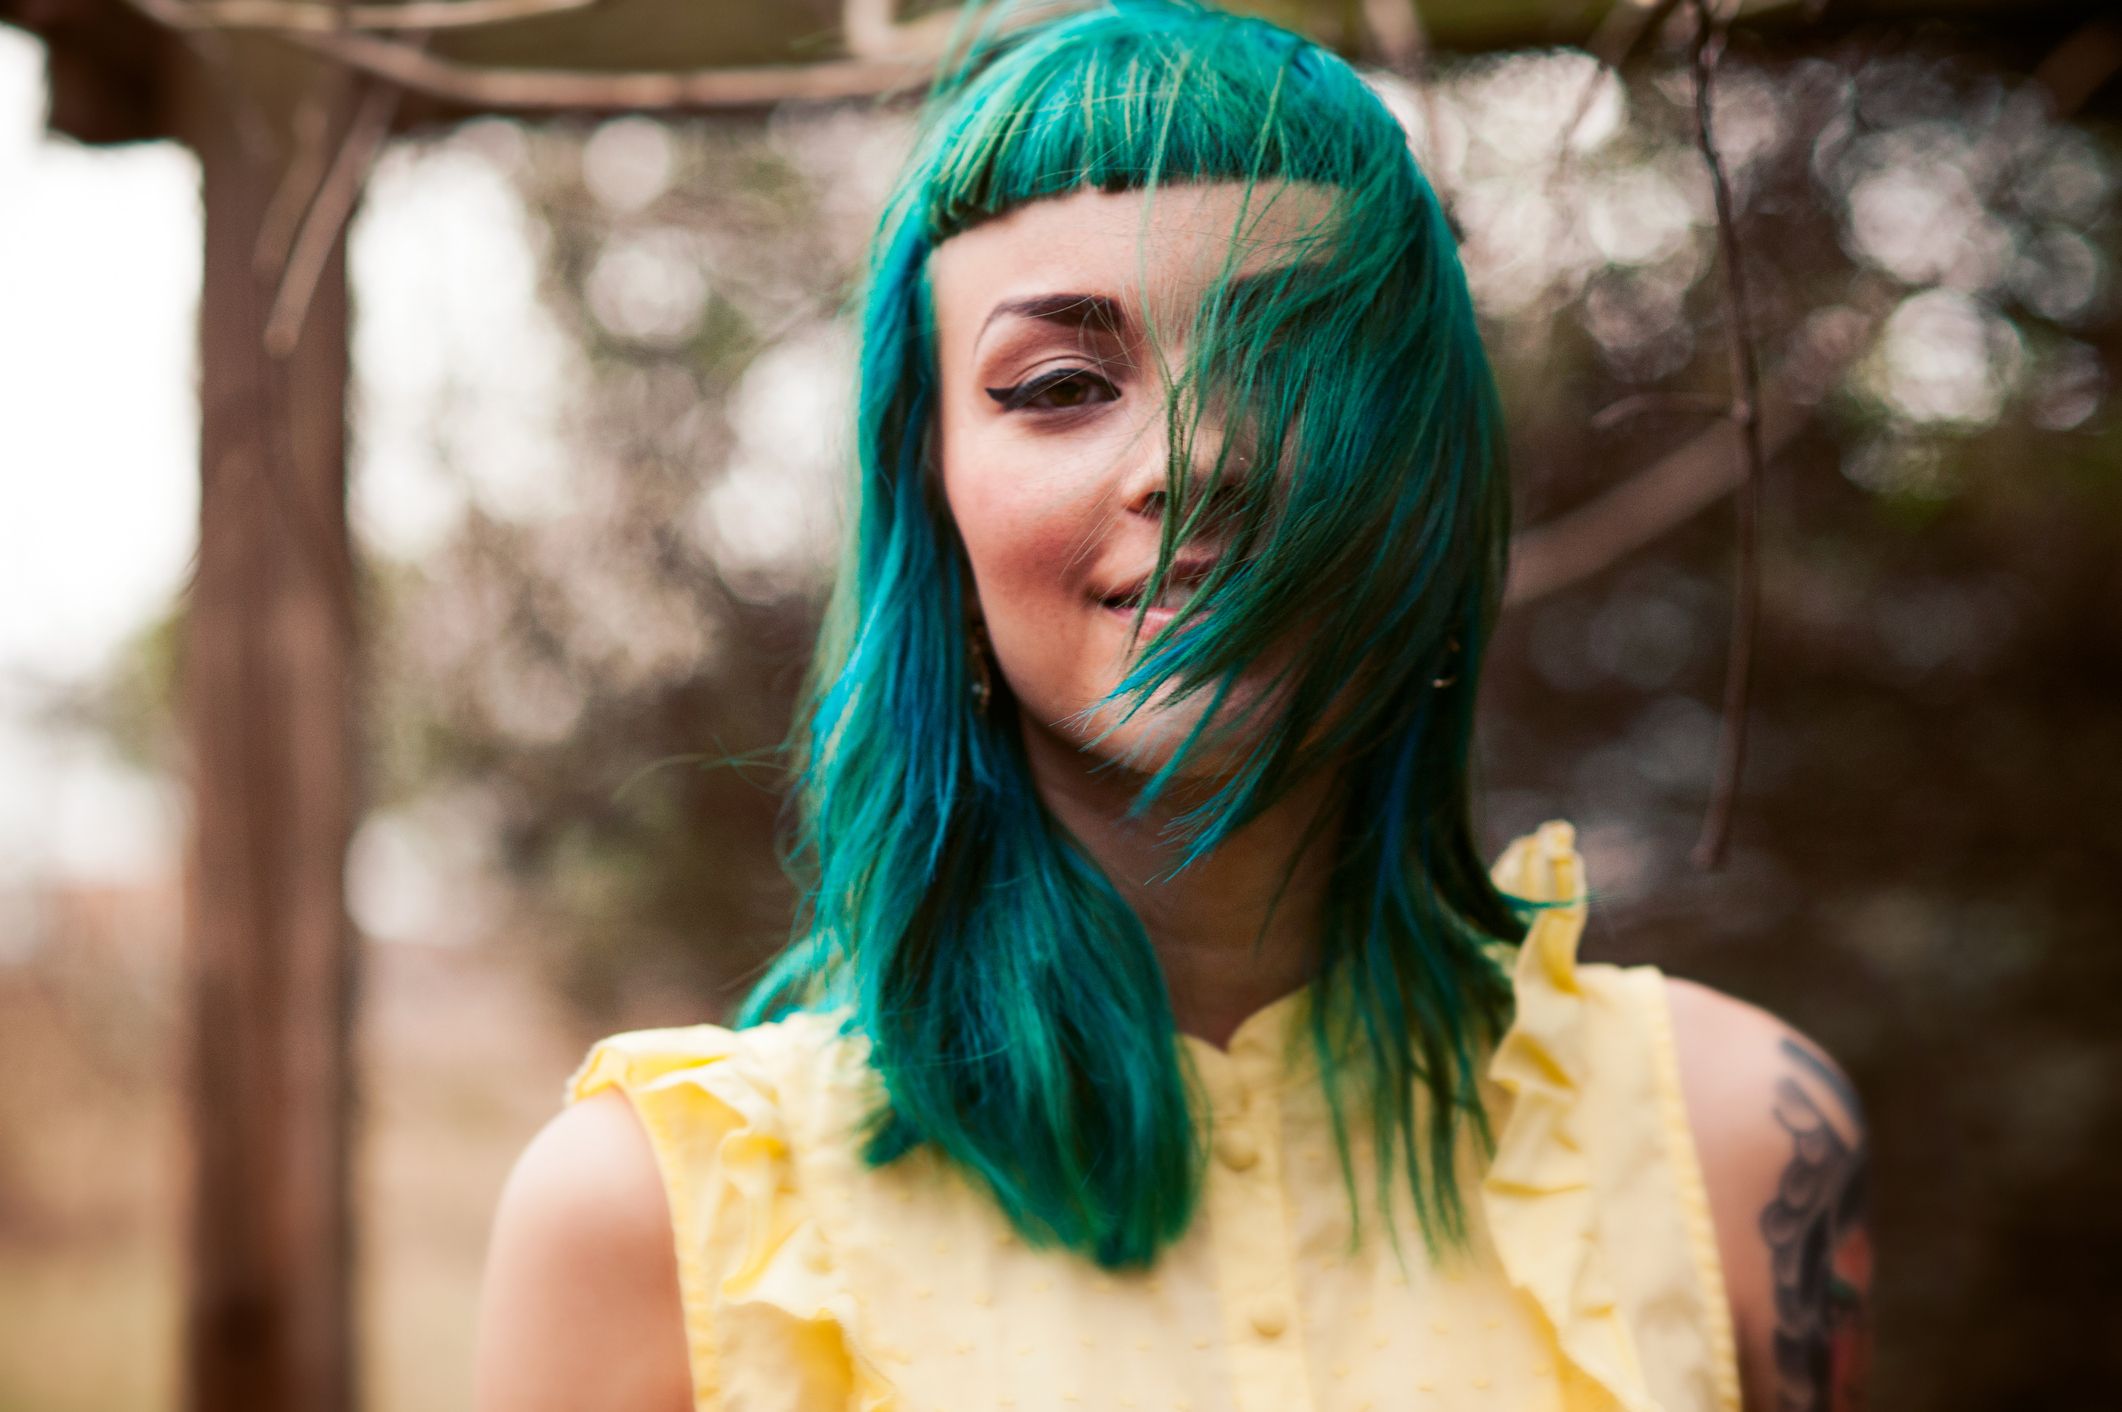 6. "Blue Hair Color Ideas for Short Hair That Will Make You Stand Out" - wide 3